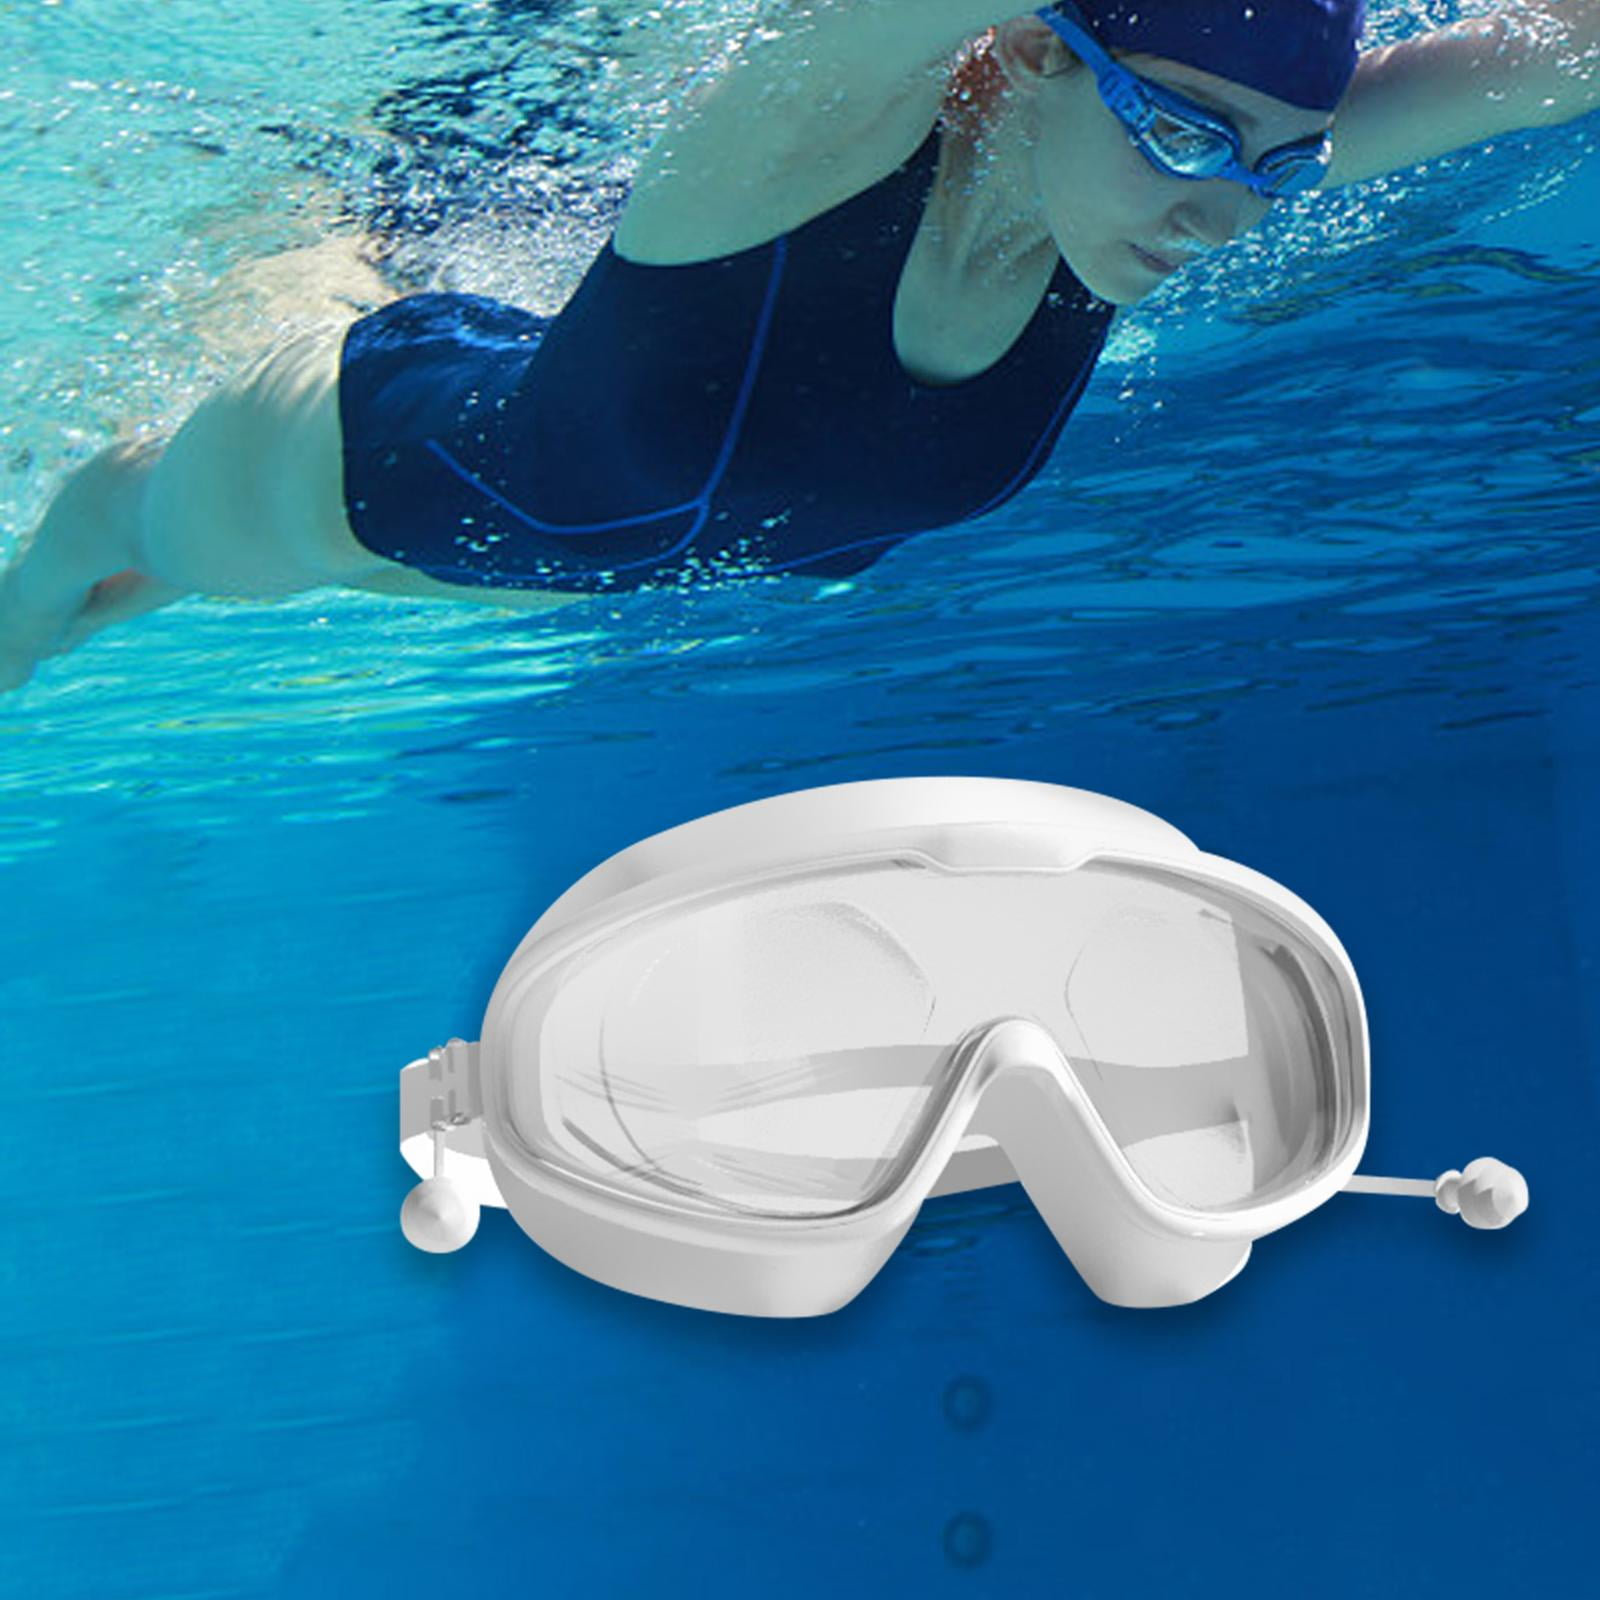 swim goggles,swim goggles for women men adult anti fog glasses,Swimming Goggles with Ear Pool Waterproof,Protection Adjustable Large Wide Frame,Professional Silicone Comfortable 550 Degree | Canada